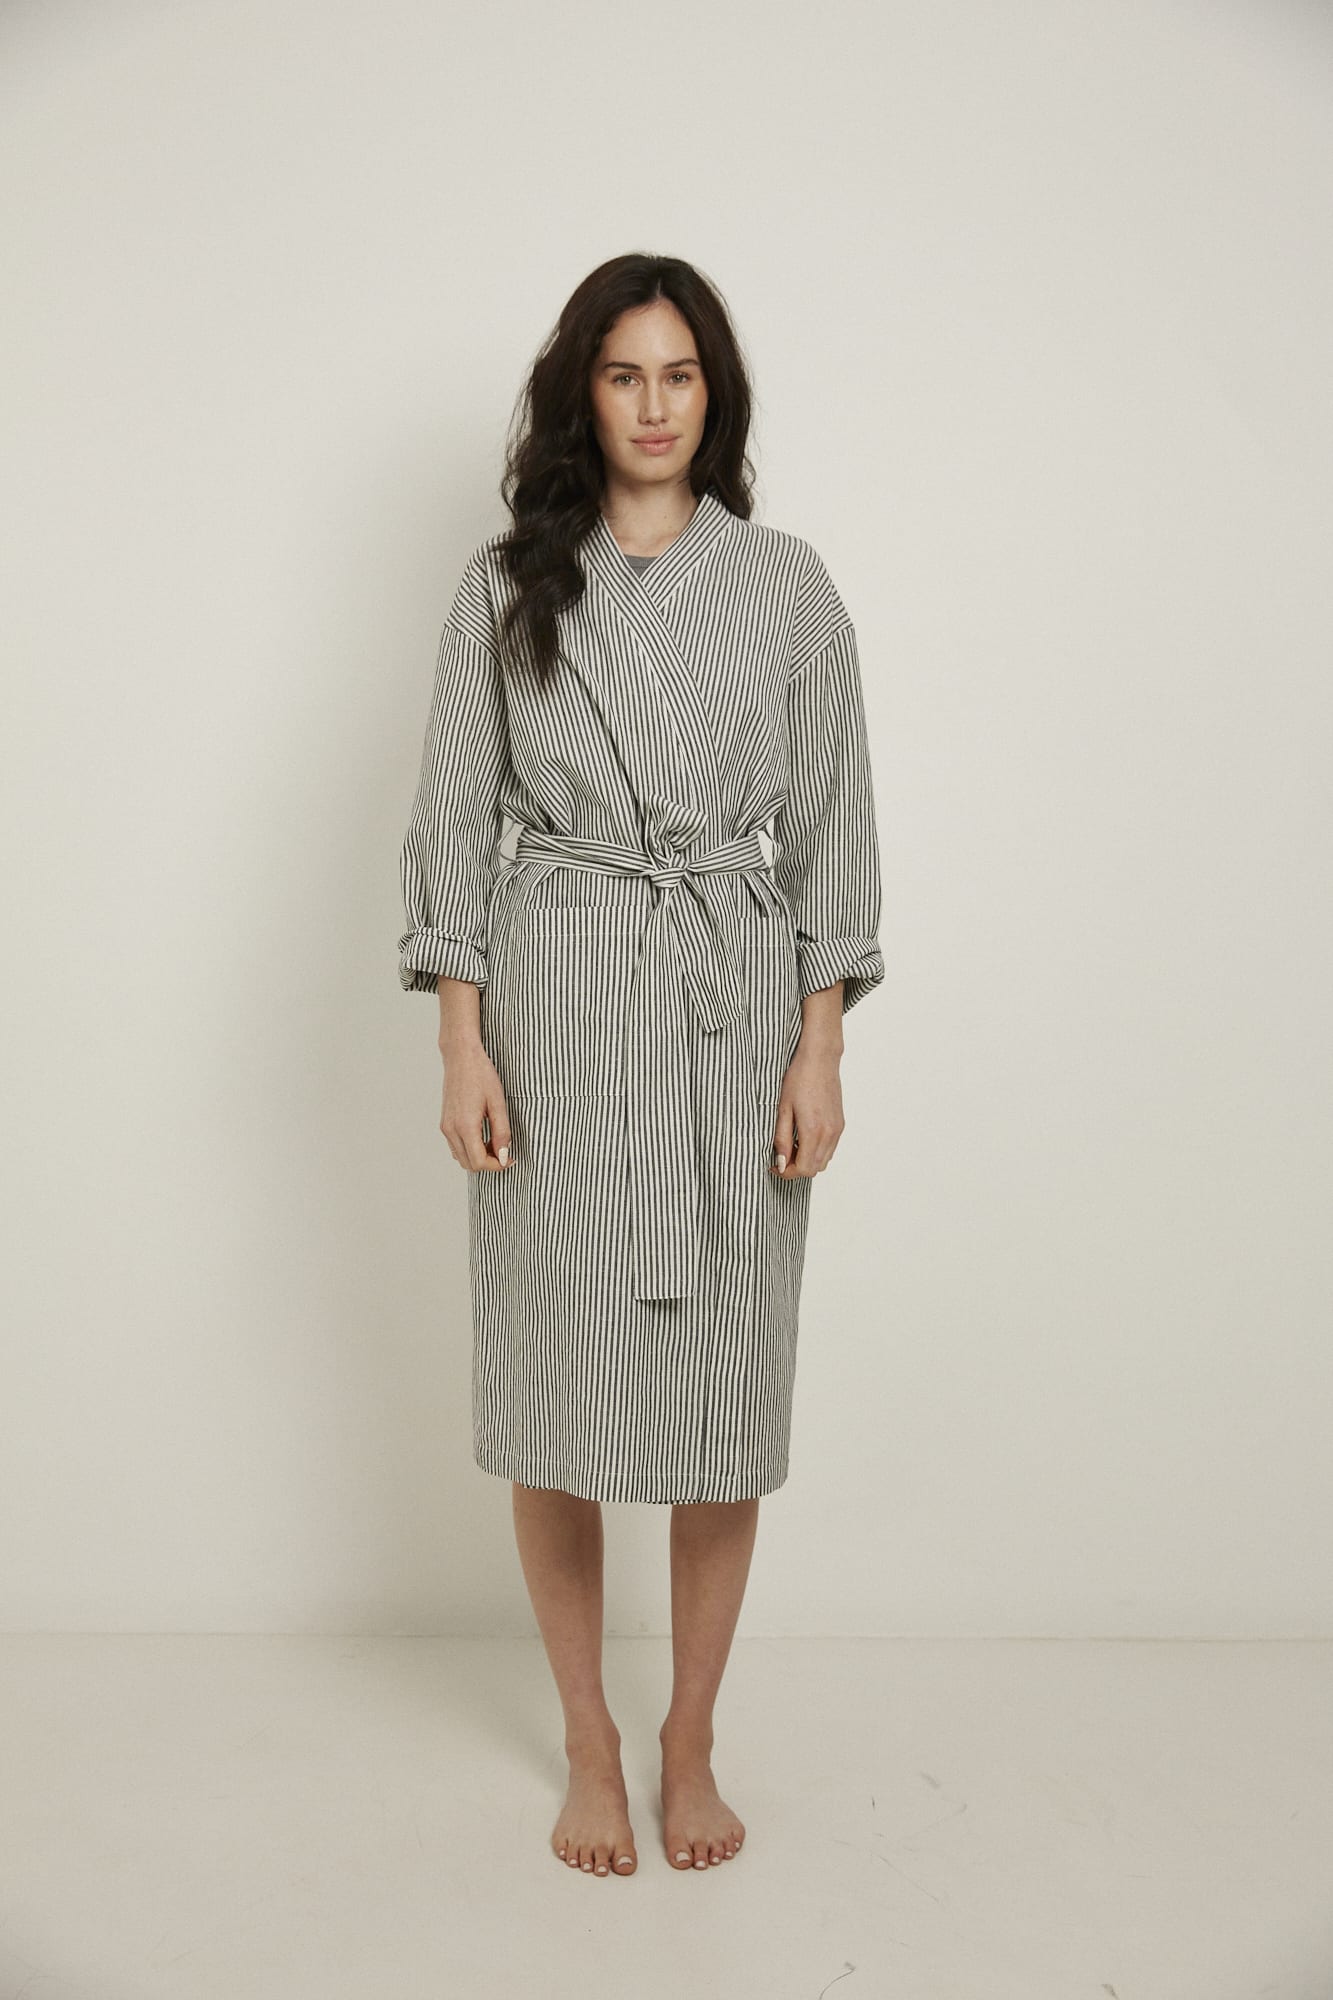 Women’s Robe.  Made from an organic cotton and linen blend, in a black and white stripe.  This robe has a relaxed-fit with a dropped shoulder, front patch pockets and a tie belt. Finished with French seams.